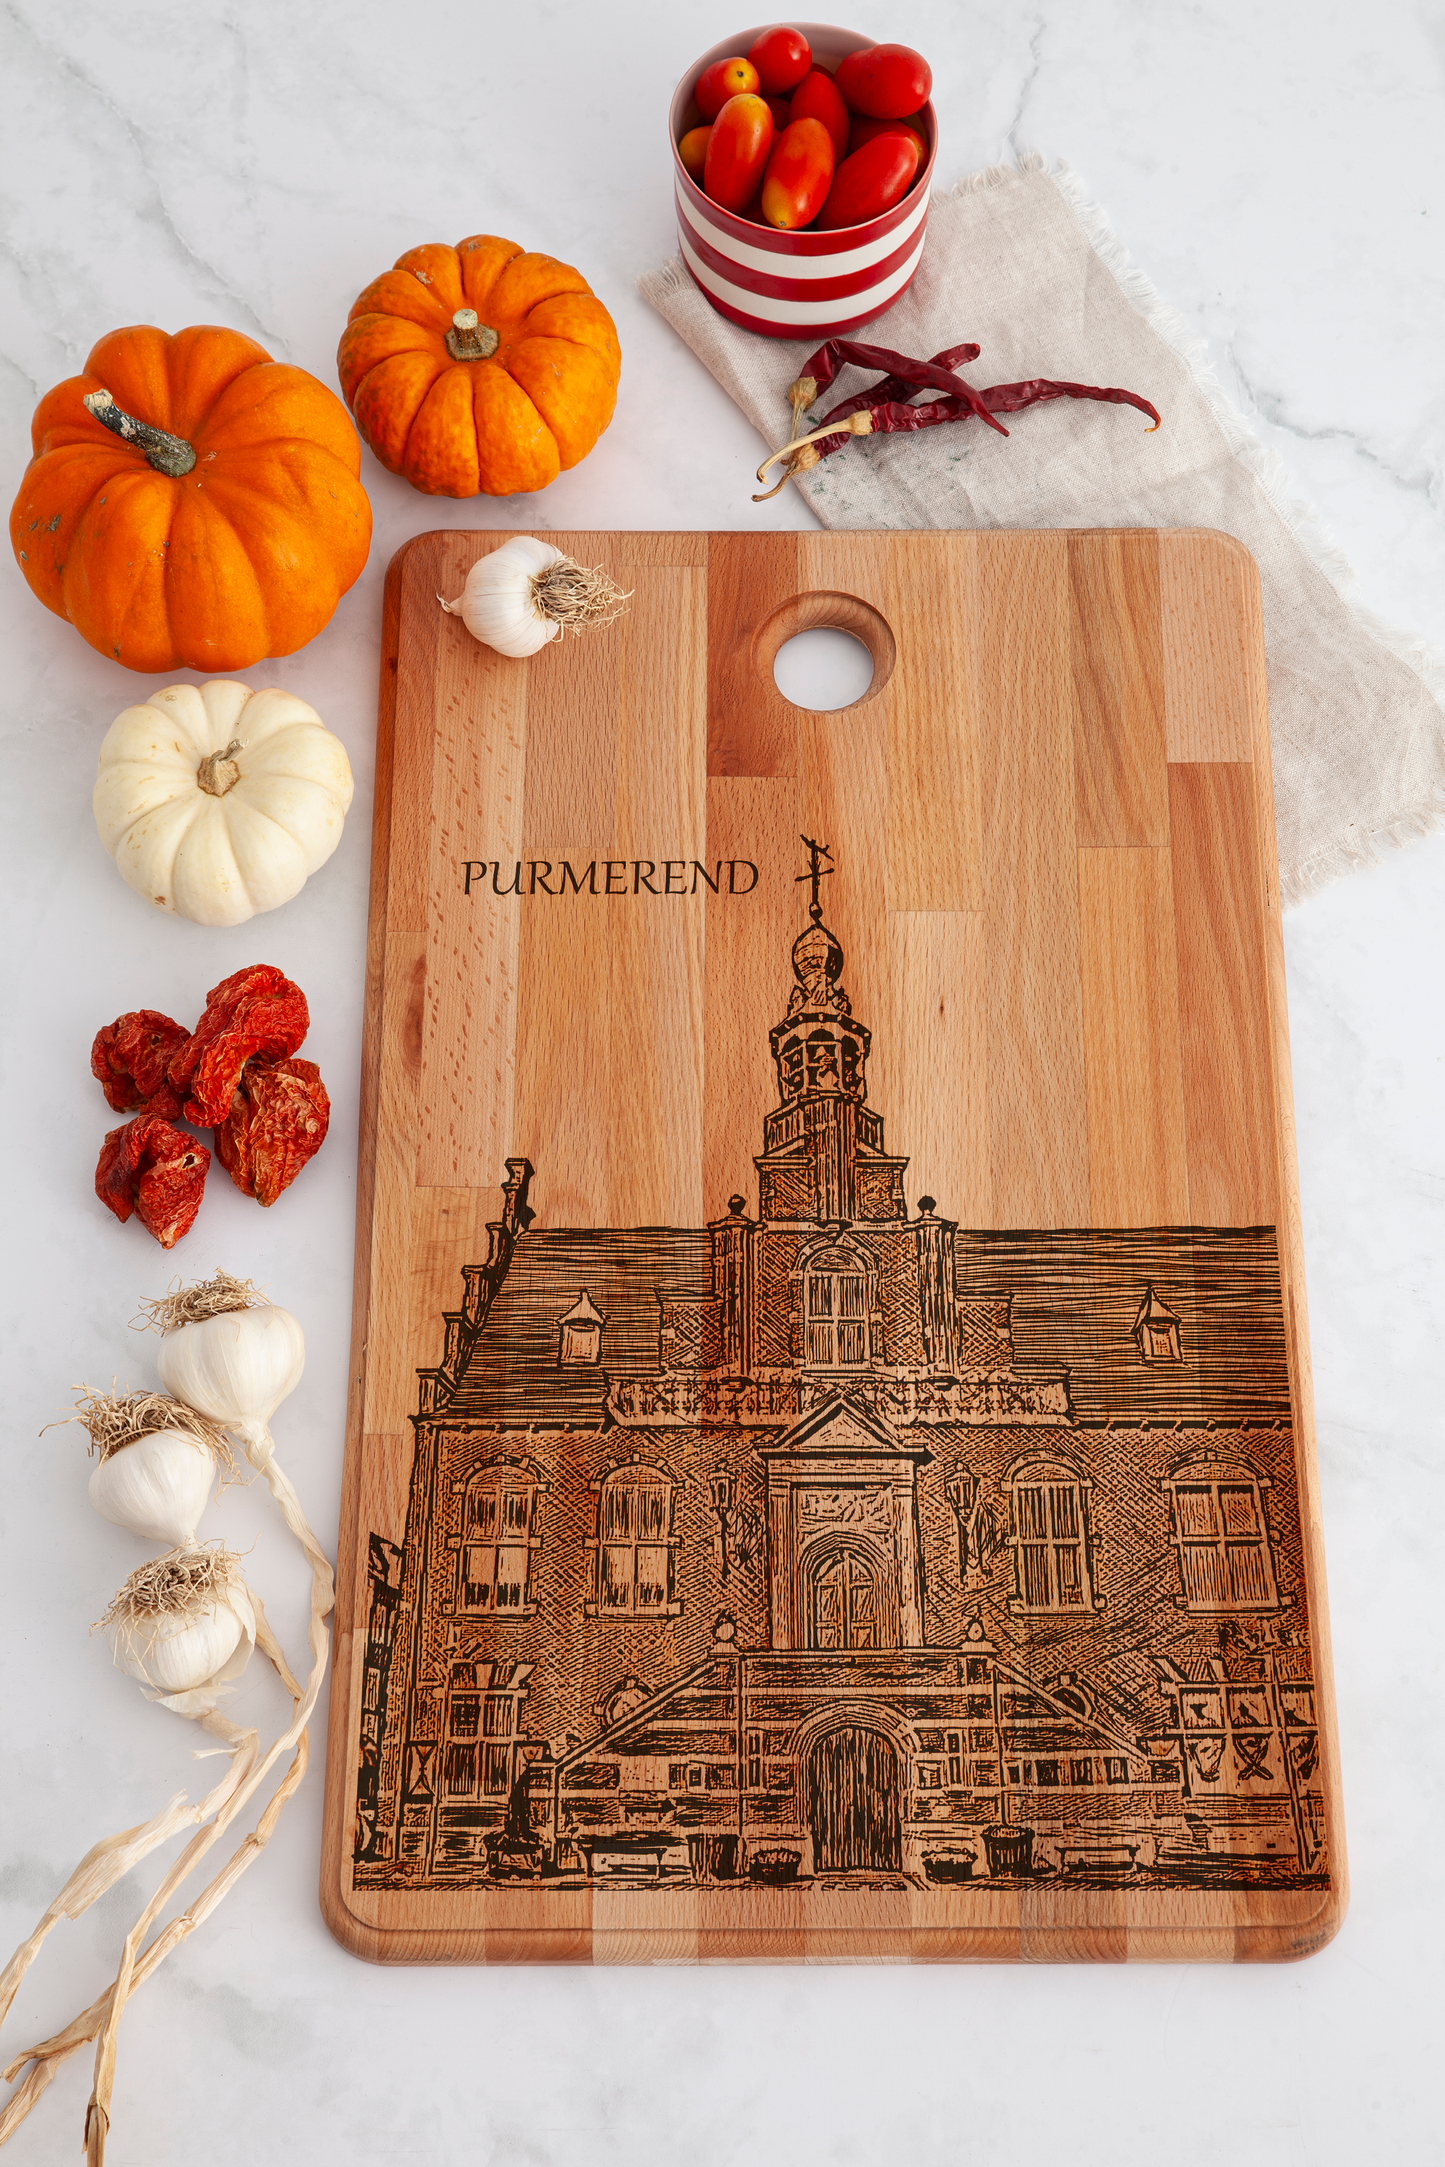 Purmerend, Stadhuis, cutting board, on countertop